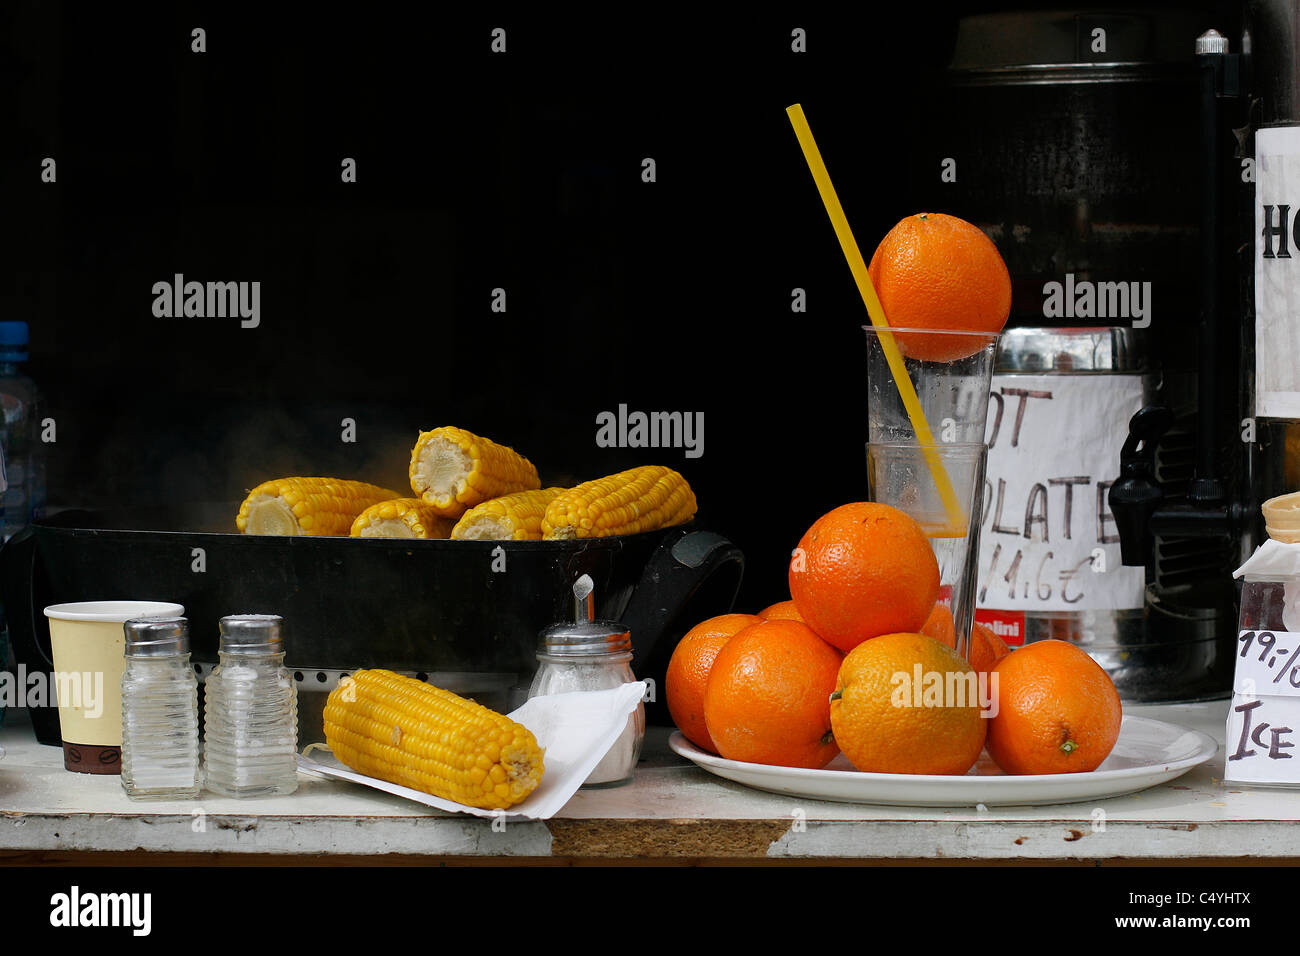 Grilled maize and fresh orange juice sold in a stall in the center of Prague, Czech Republic. Stock Photo